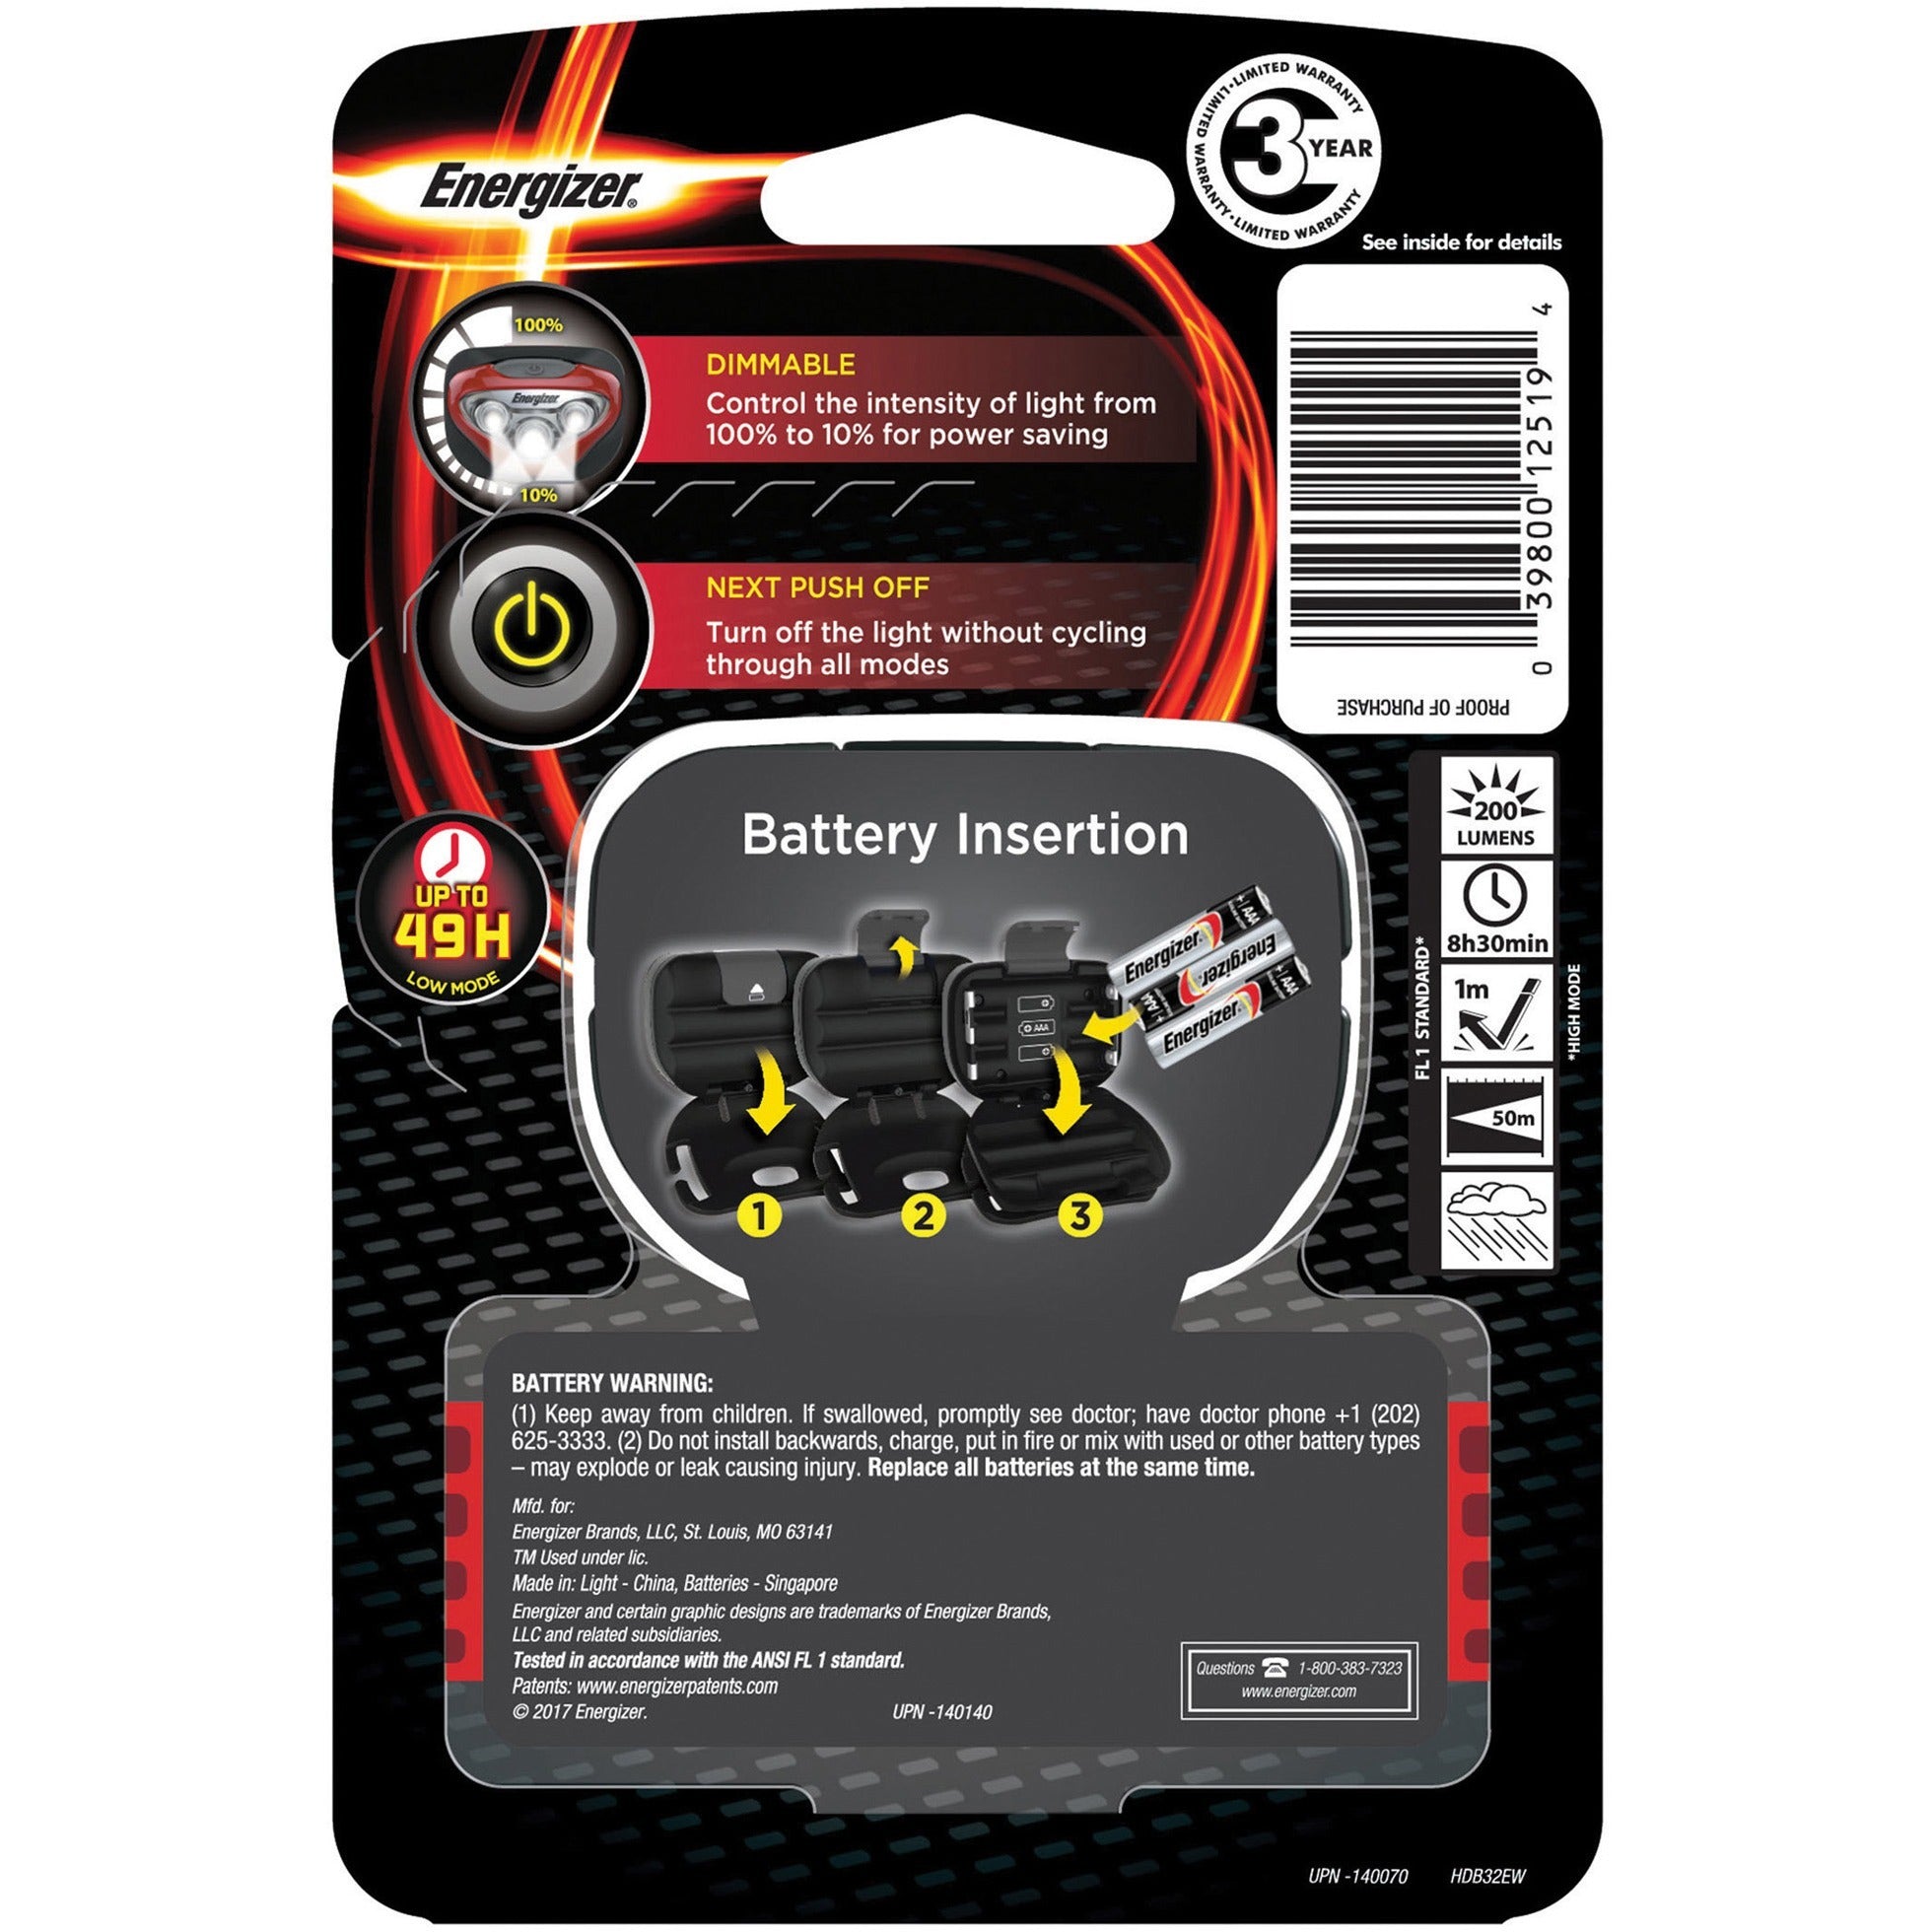 energizer-vision-hd-led-headlamp-led-150-lm-lumen-3-x-aaa-impact-resistant-water-resistant-shatter-proof-red_evehdb32ect - 2